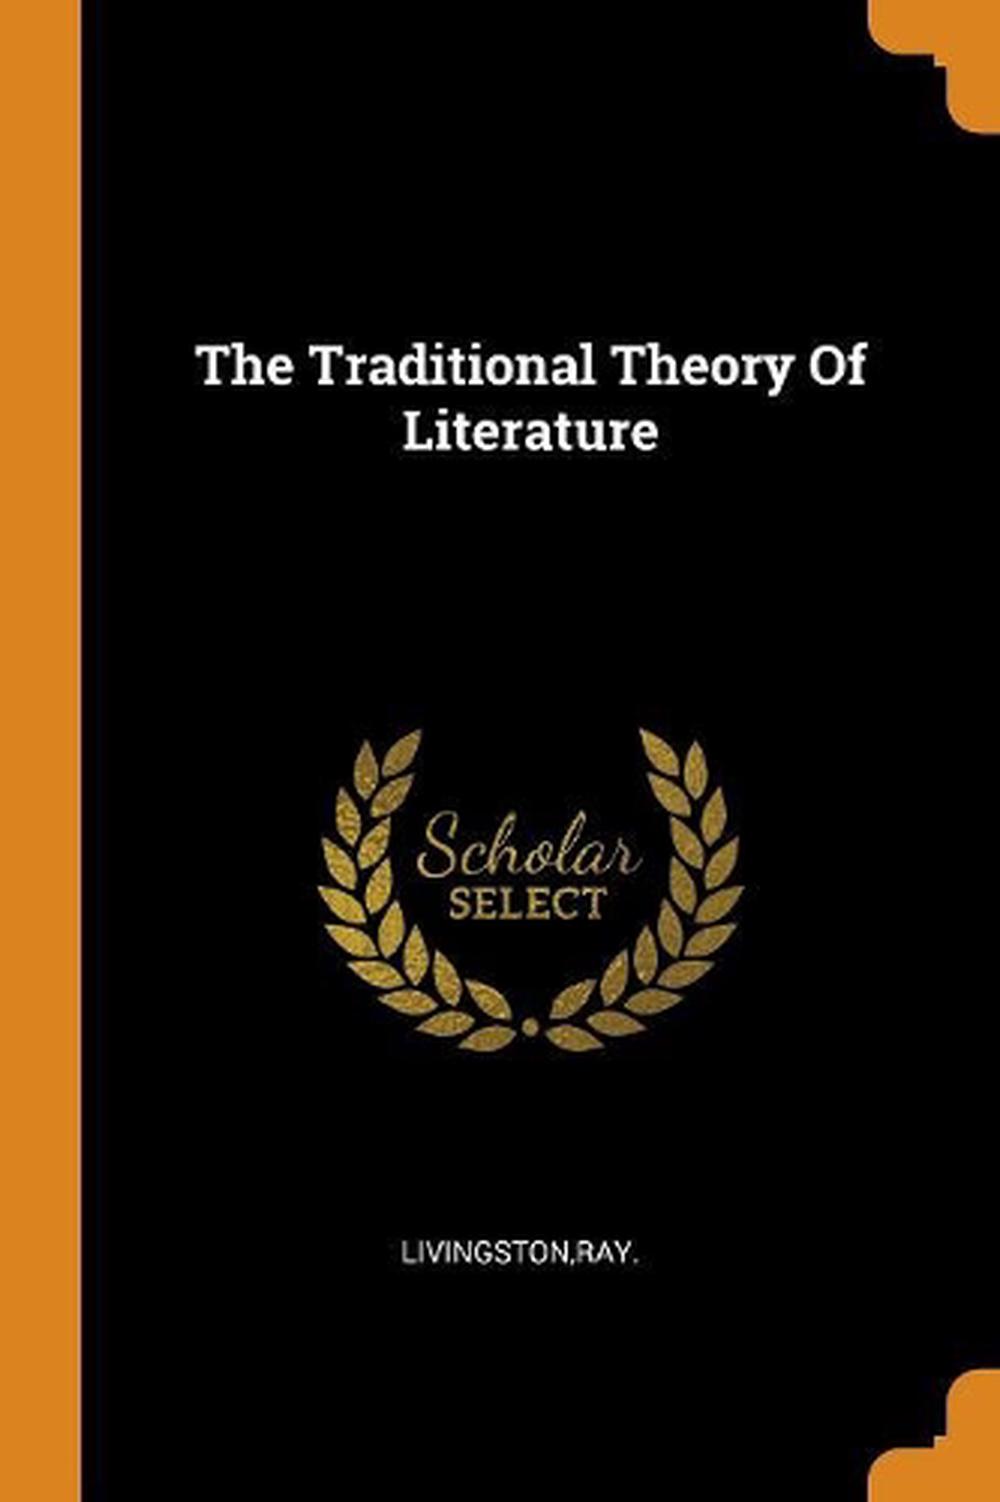 theory of literature book